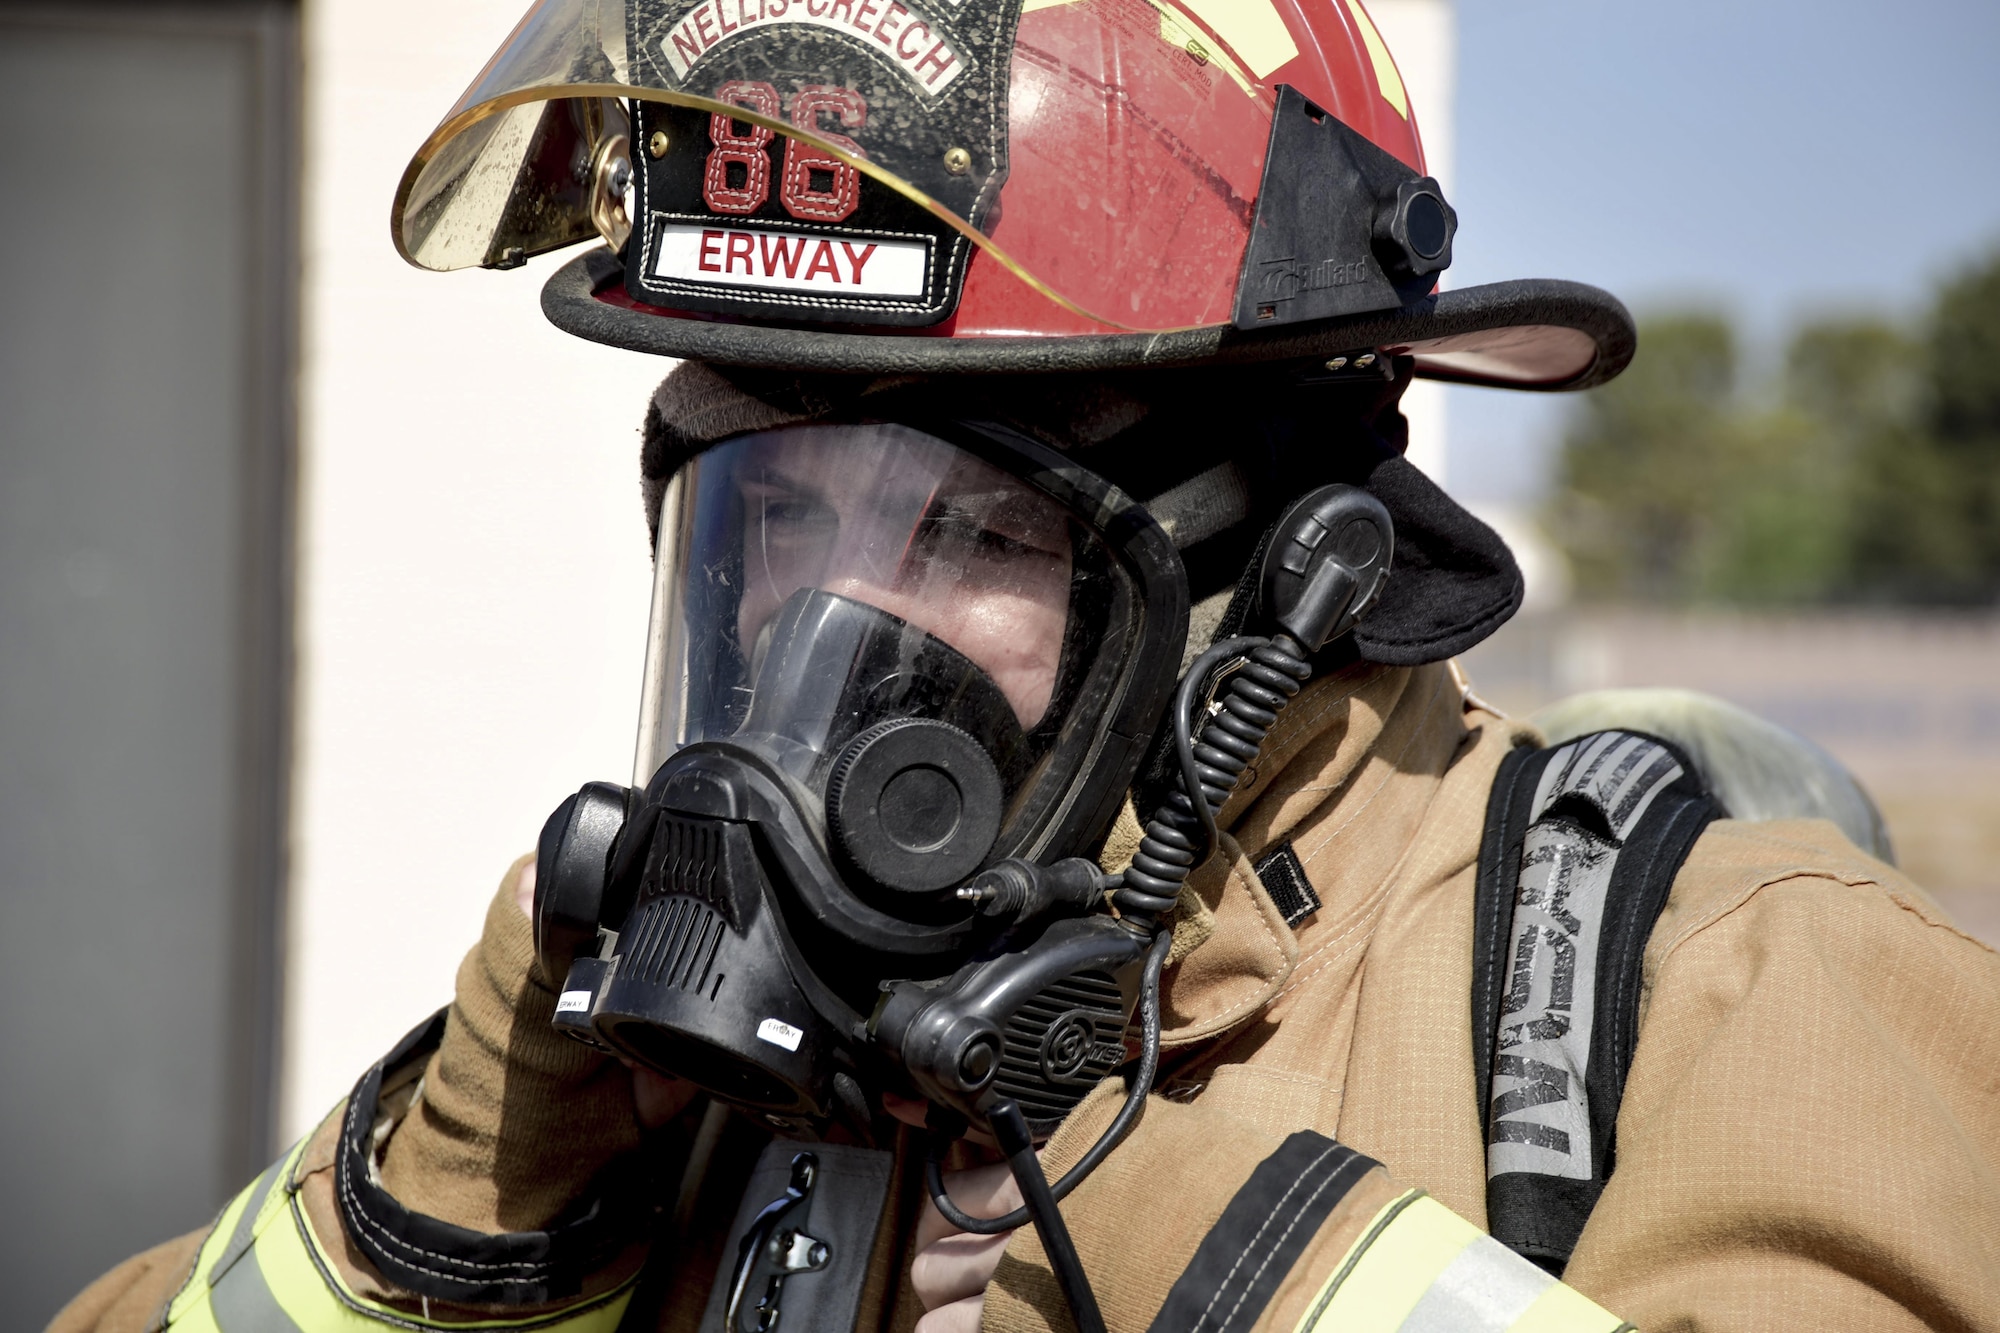 Staff Sgt. Blaine Erway, 99th Civil Engineer Squadron firefighter crew chief, adjusts his gas mask before entering a simulated house fire during Red Flag 17-3 at Nellis Air Force Base, Nev., July 18, 2017. Red Flag helps the firefighters train on and off the flightline to put their life-saving skills to the test. (U.S. Air Force photo by Airman 1st Class Andrew D. Sarver/Released)